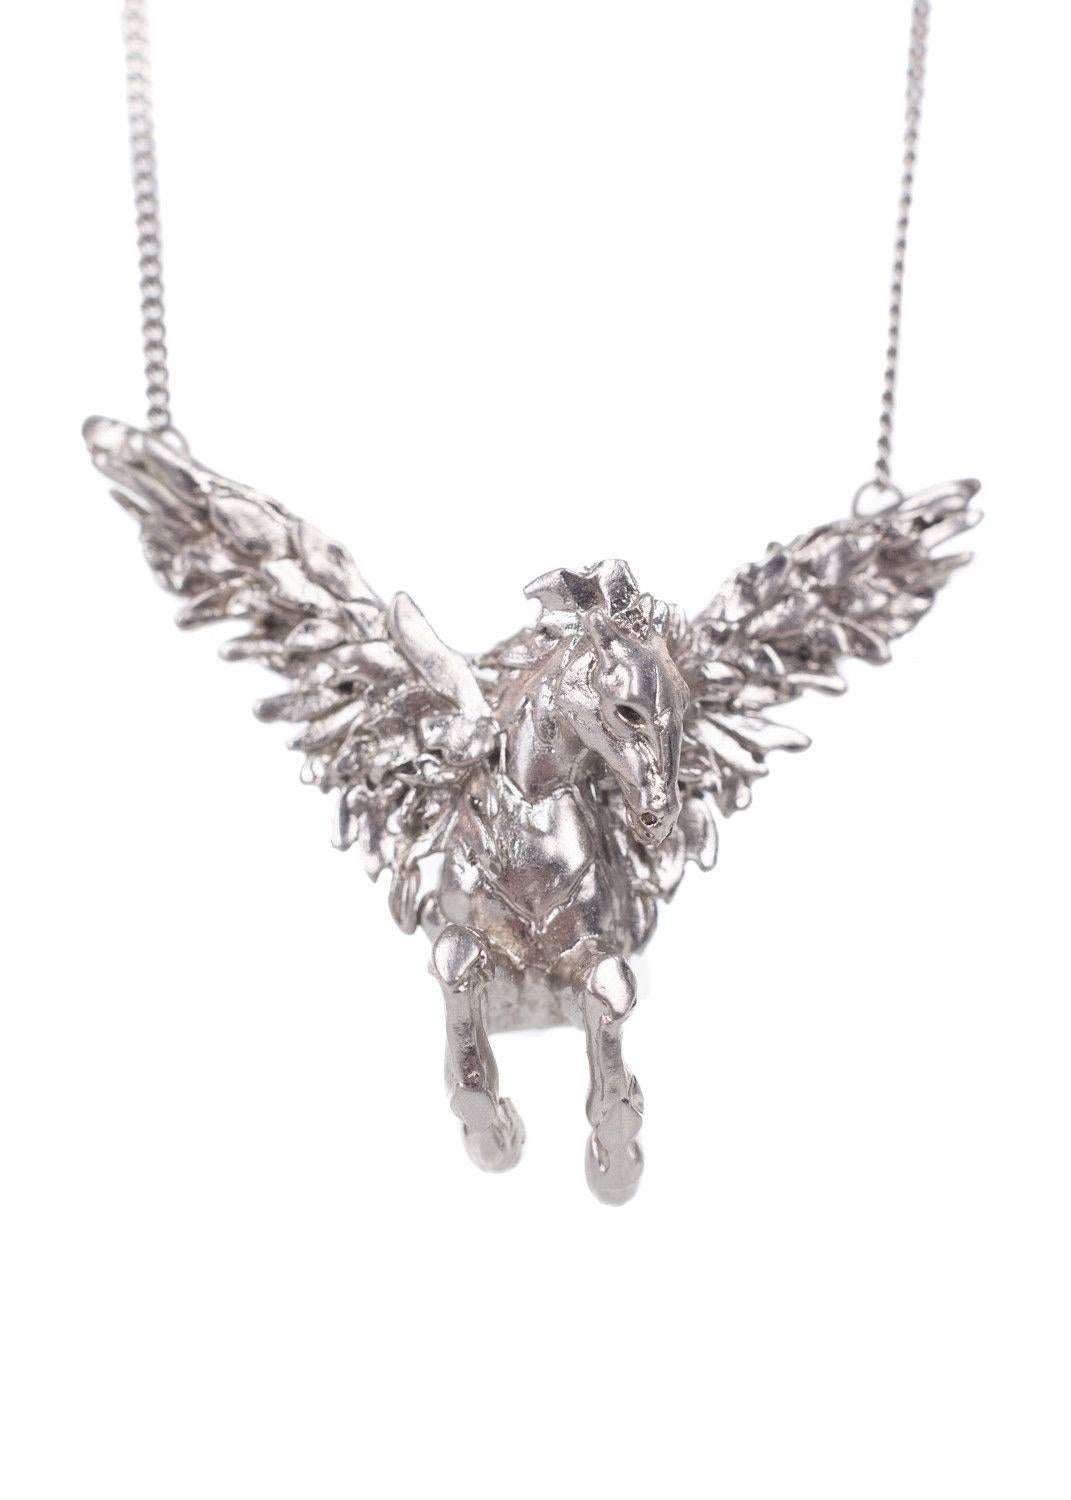 Get your Roberto Cavalli Necklace for the minimal decadence. This necklace features a thin silver chain, soaring horse pendant, and tonal circular appliques. You can pair this necklace with a basic t shirt and skinny jeans and go.

11 inch Length
1